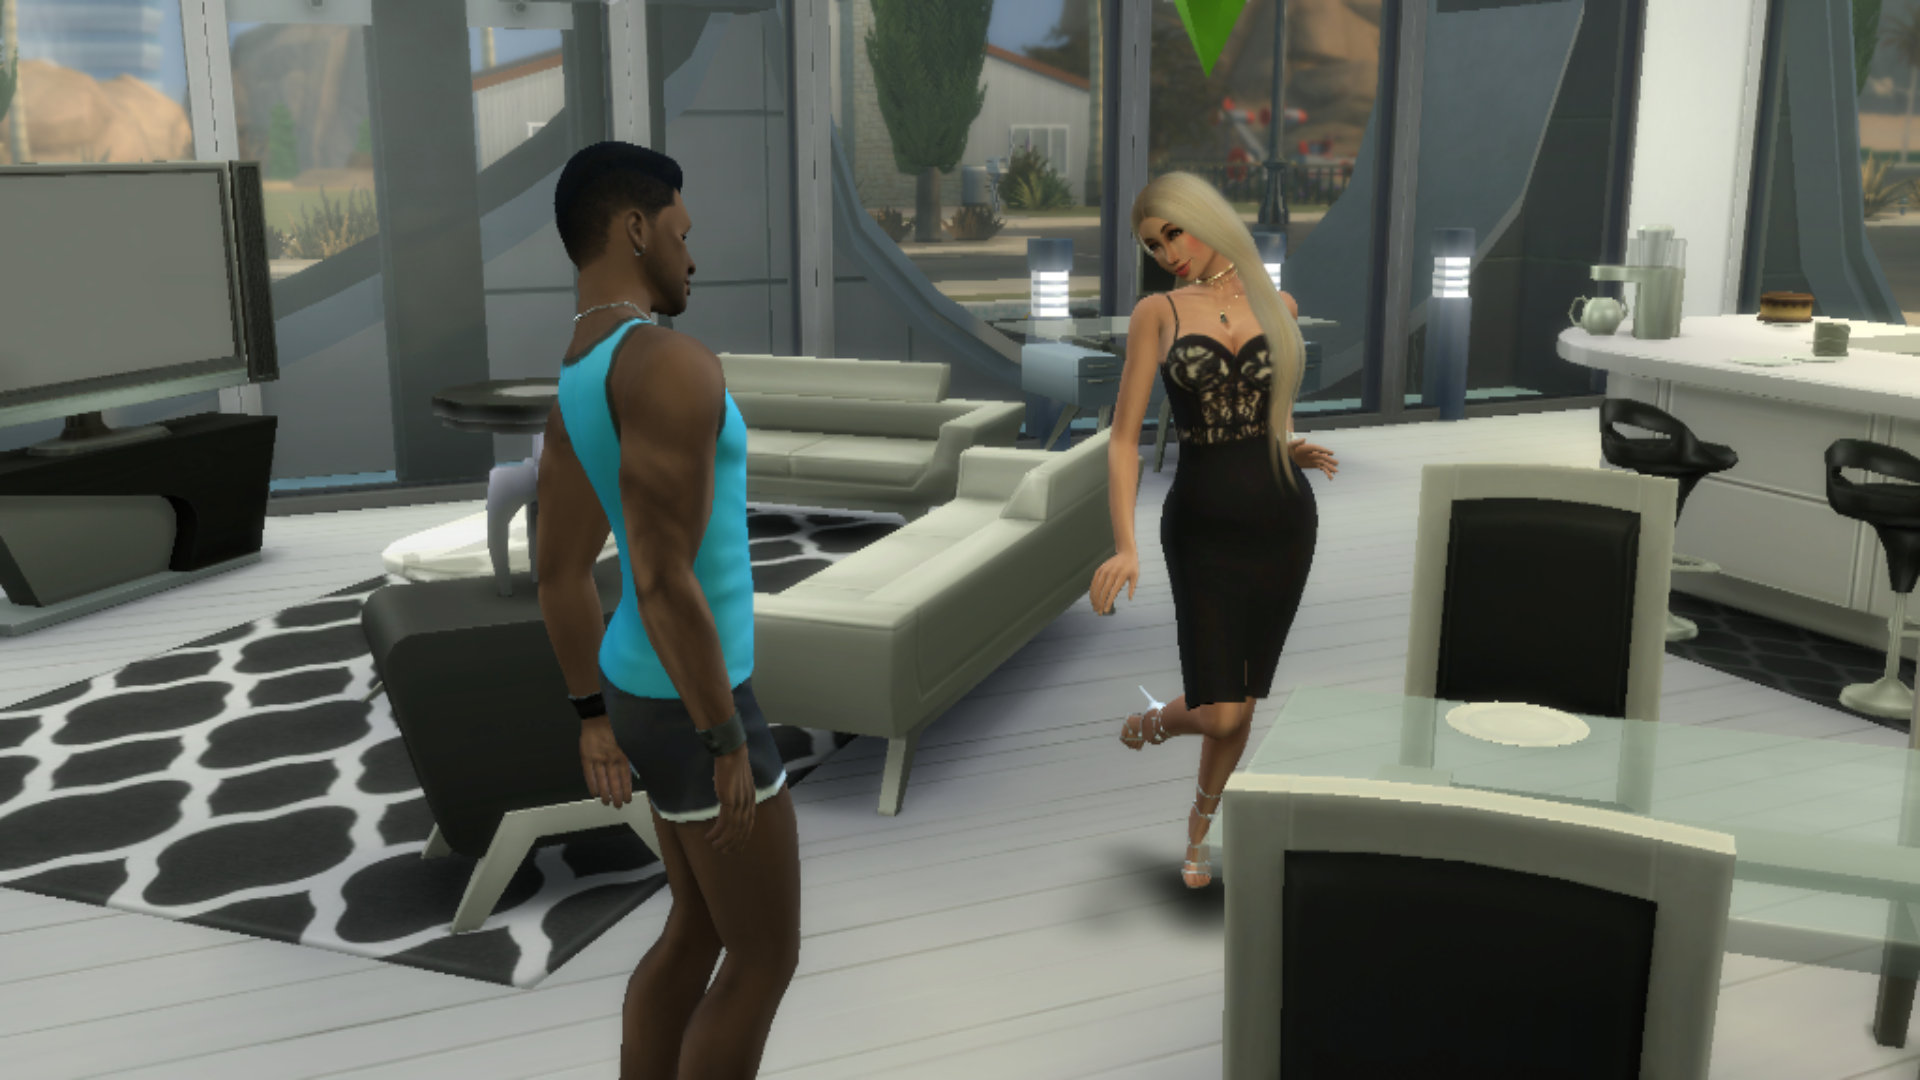 Hot Complications Sims Story Page 2 The Sims 4 General Discussion